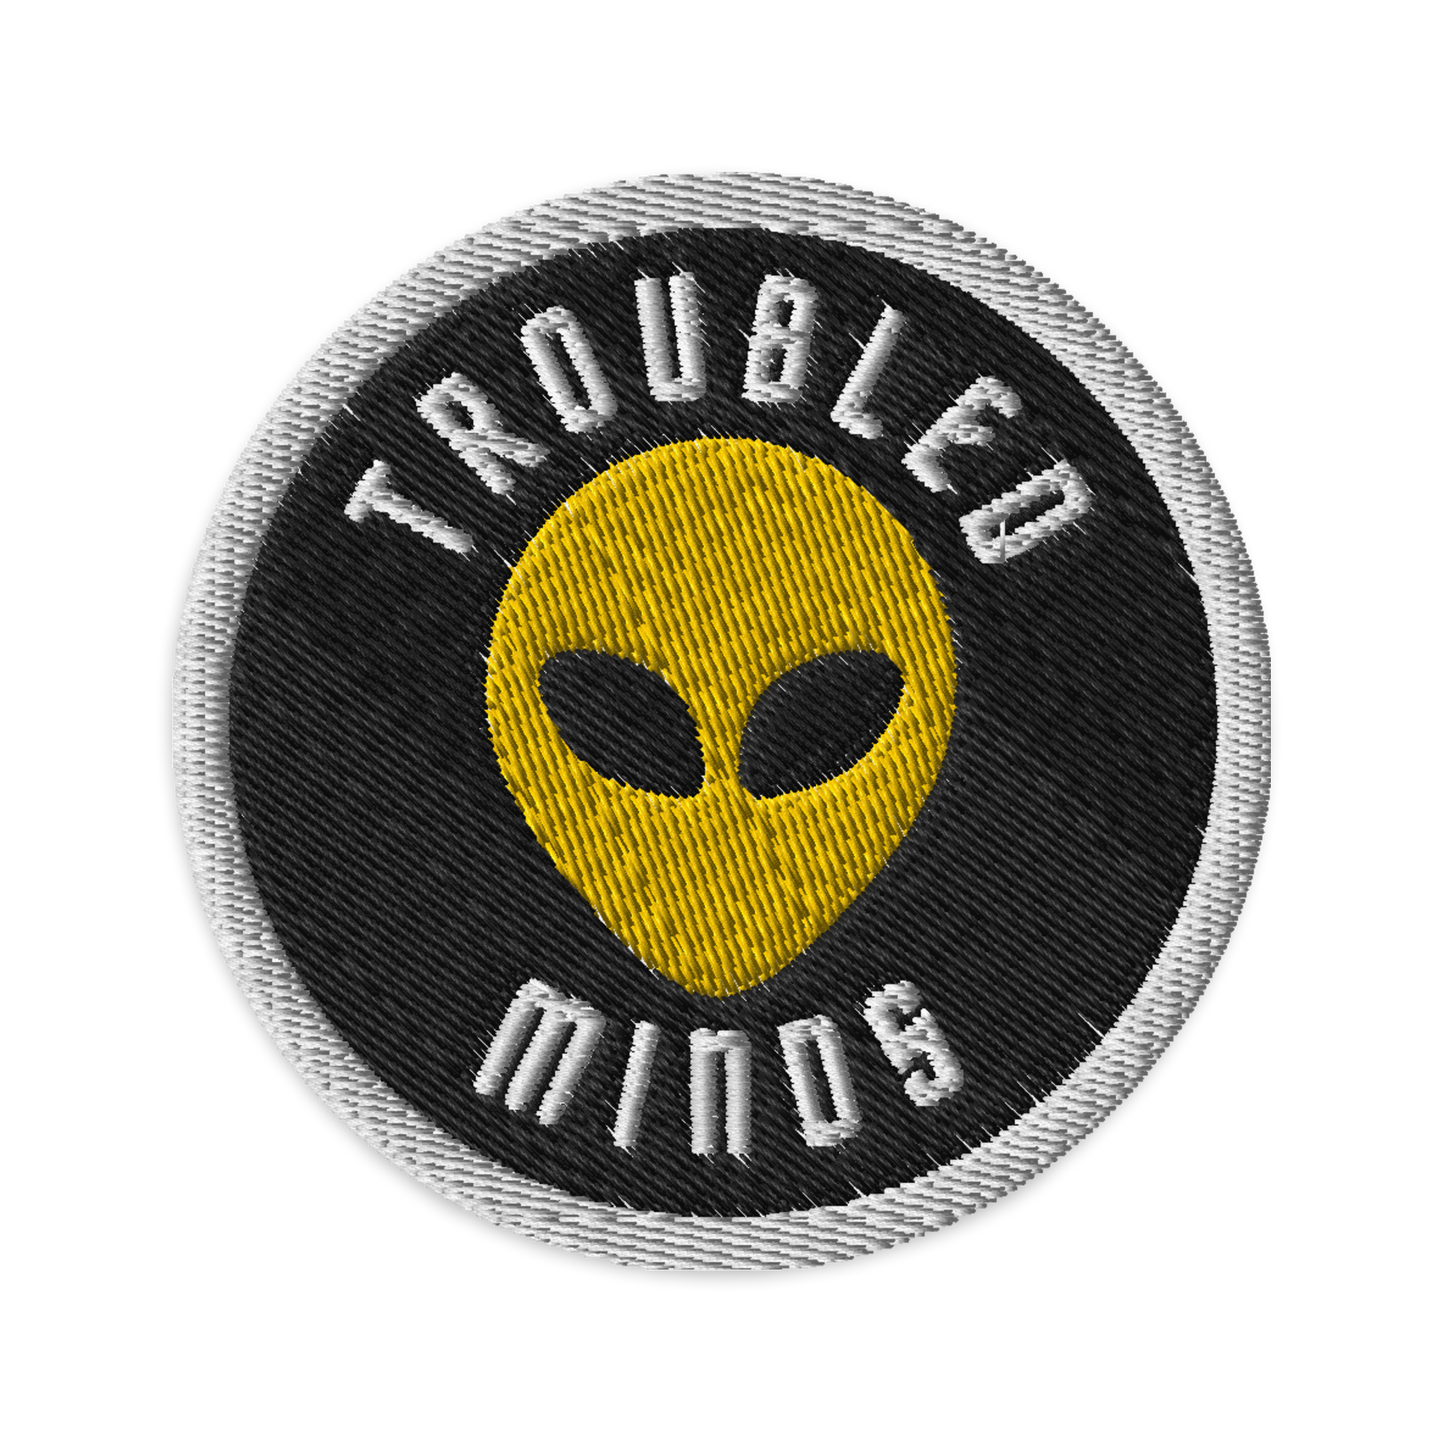 Troubled Minds Embroidered Patch